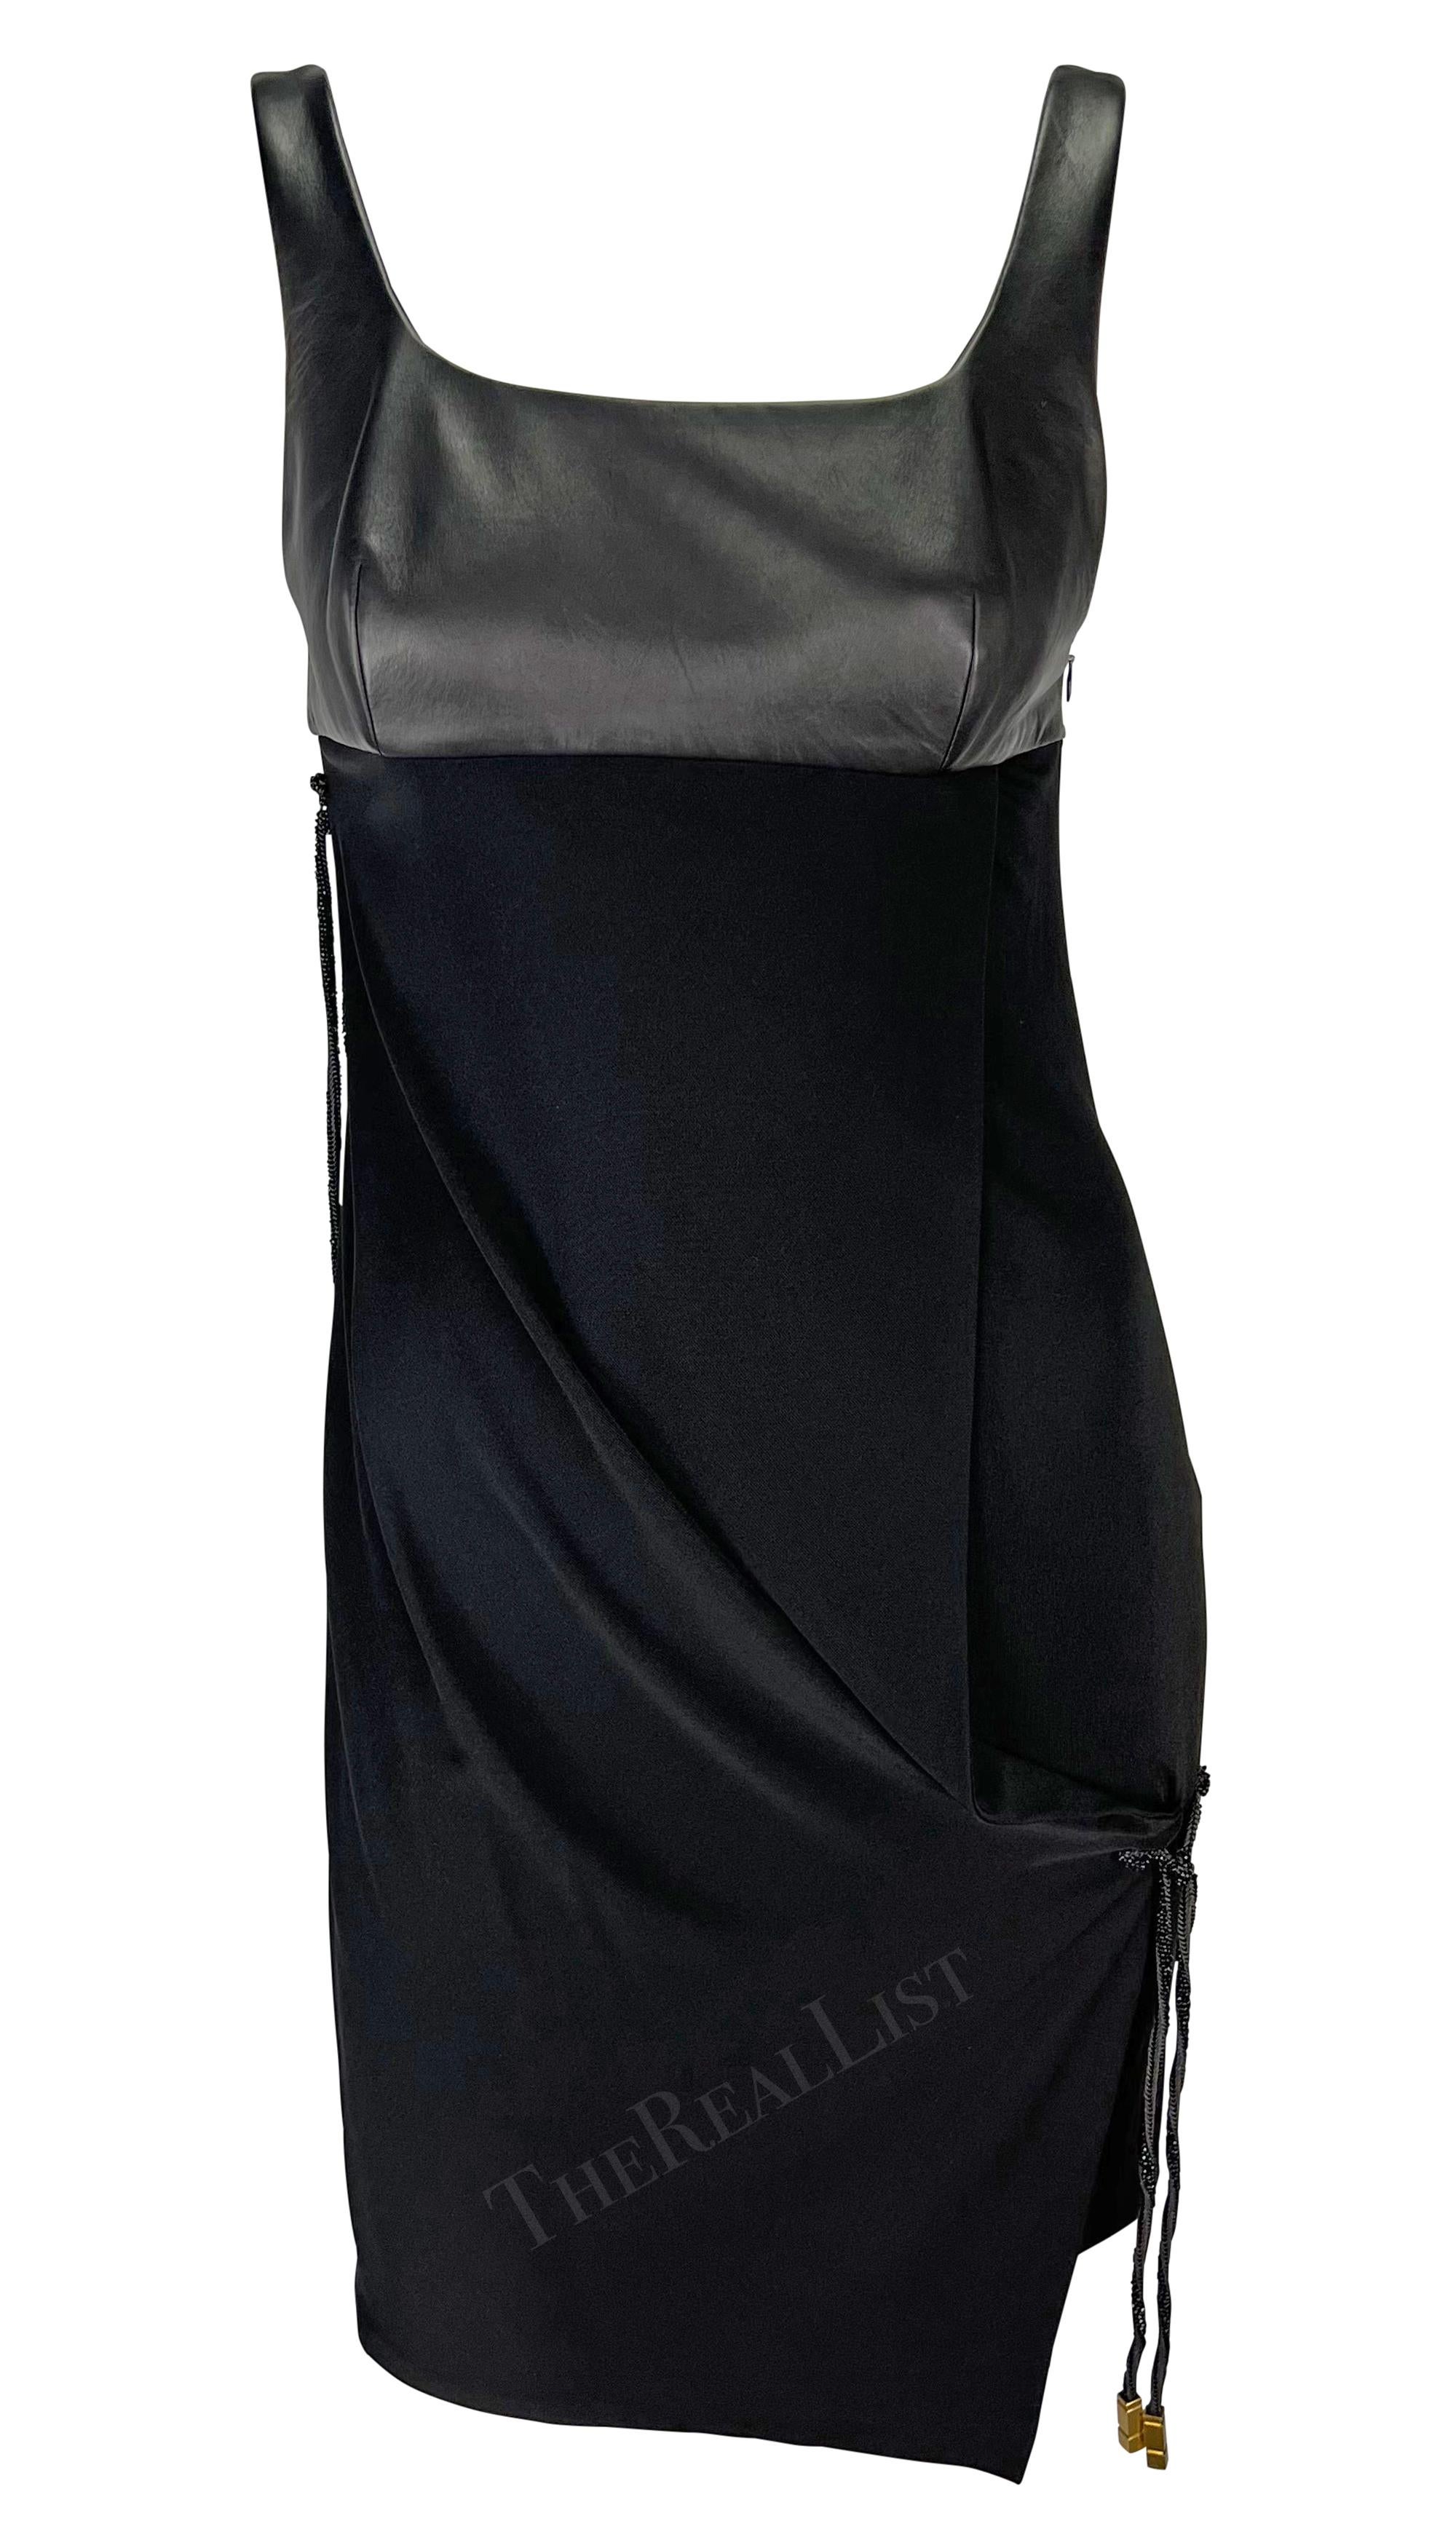 Presenting a fabulous black Gianni Versace mini dress, designed by Donatella Versace. From the Fall/Winter 1998 collection, this sleeveless dress features a bust constructed of leather and a scoop neckline. The dress is made complete with wrap